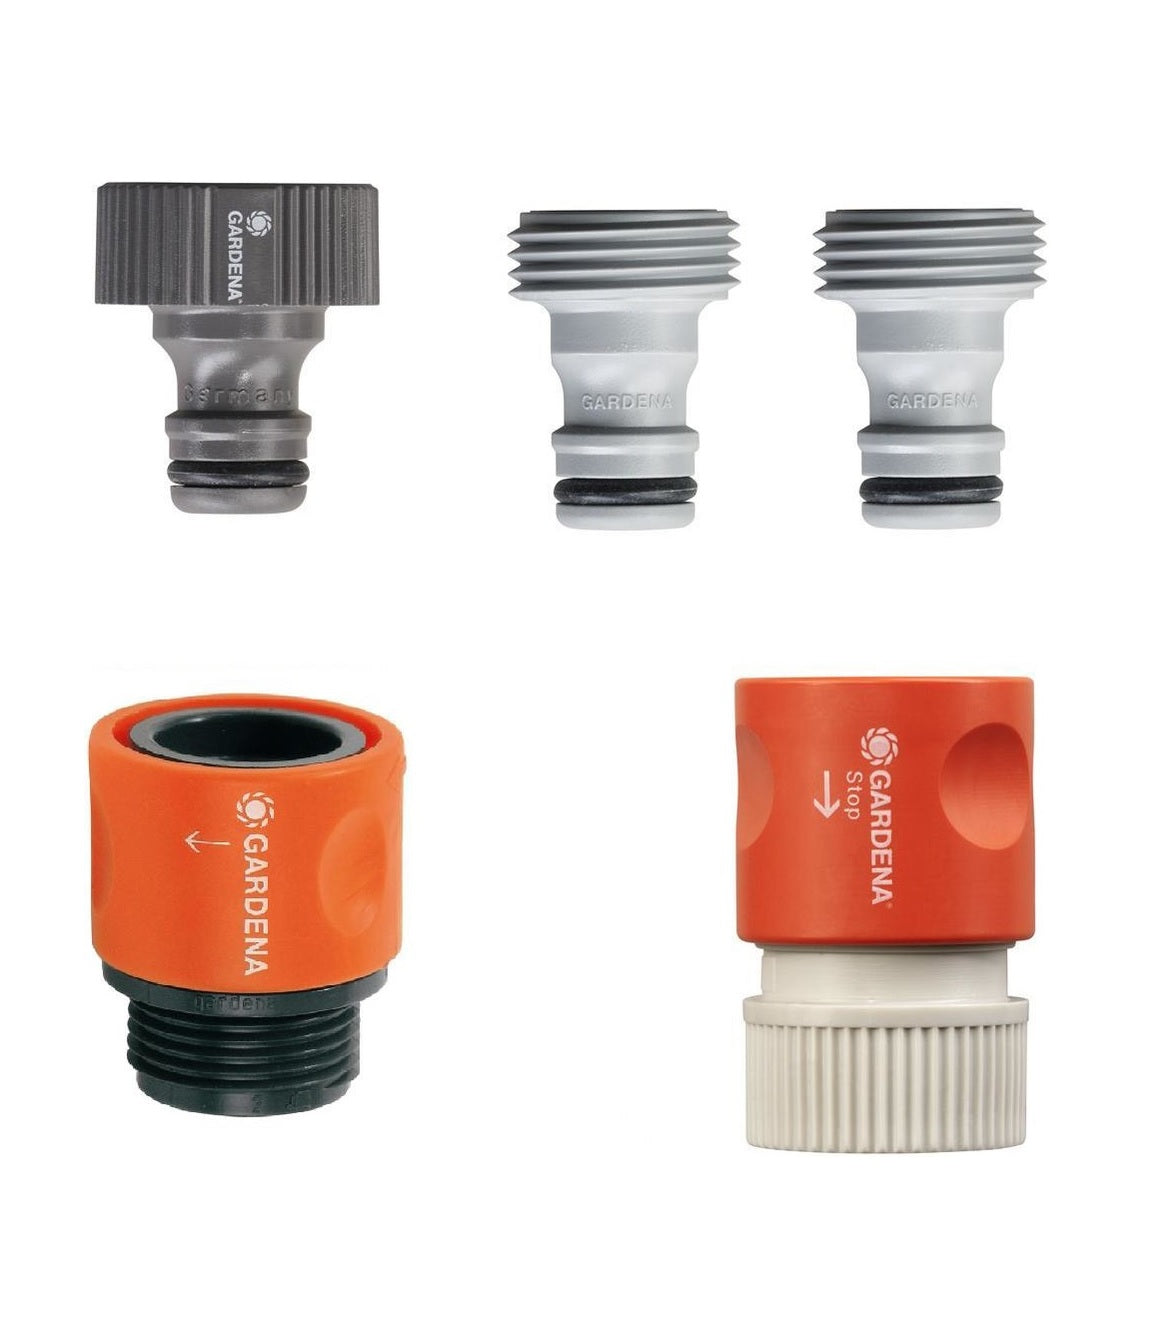 Buy gardena 36004 - Online store for watering, quick connectors in USA, on sale, low price, discount deals, coupon code